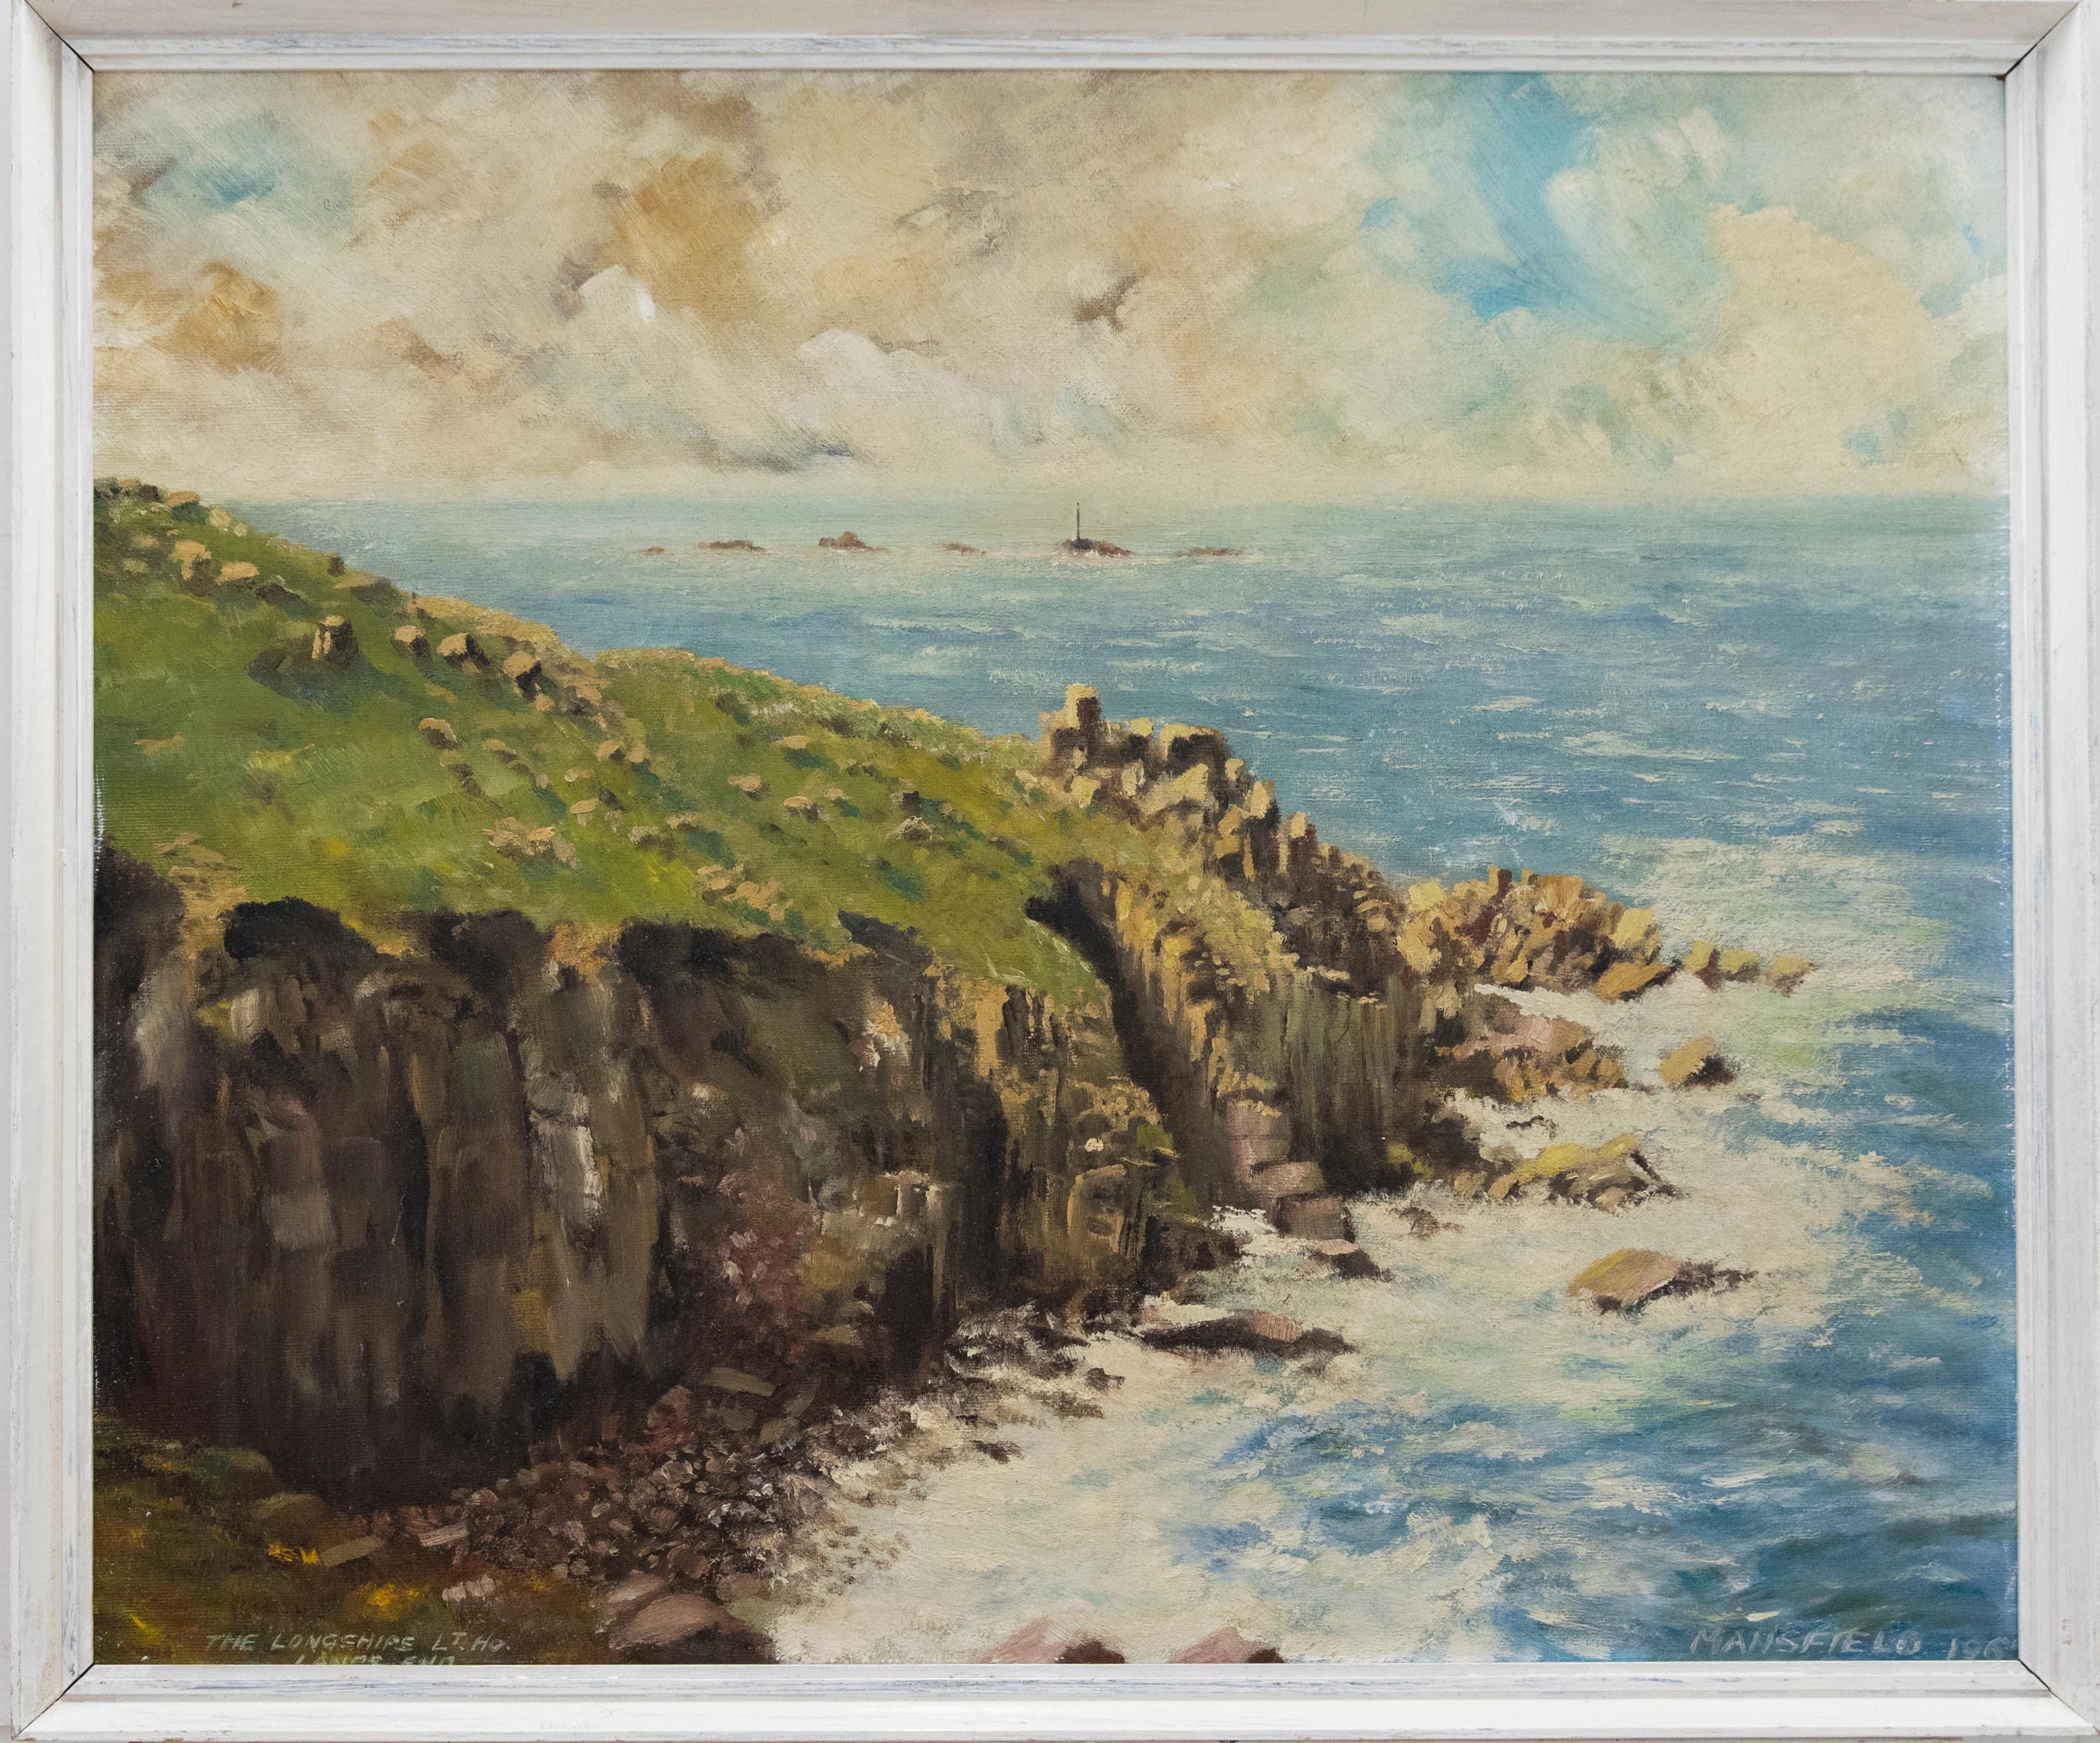 A dramatic coastal scene in oil, looking across headland to Longships lighthouse at Lands End. The artist has captured white waves crashing against fallen rock and rugged cliffs, with the landmark lighthouse standing solemn, further out at sea. The